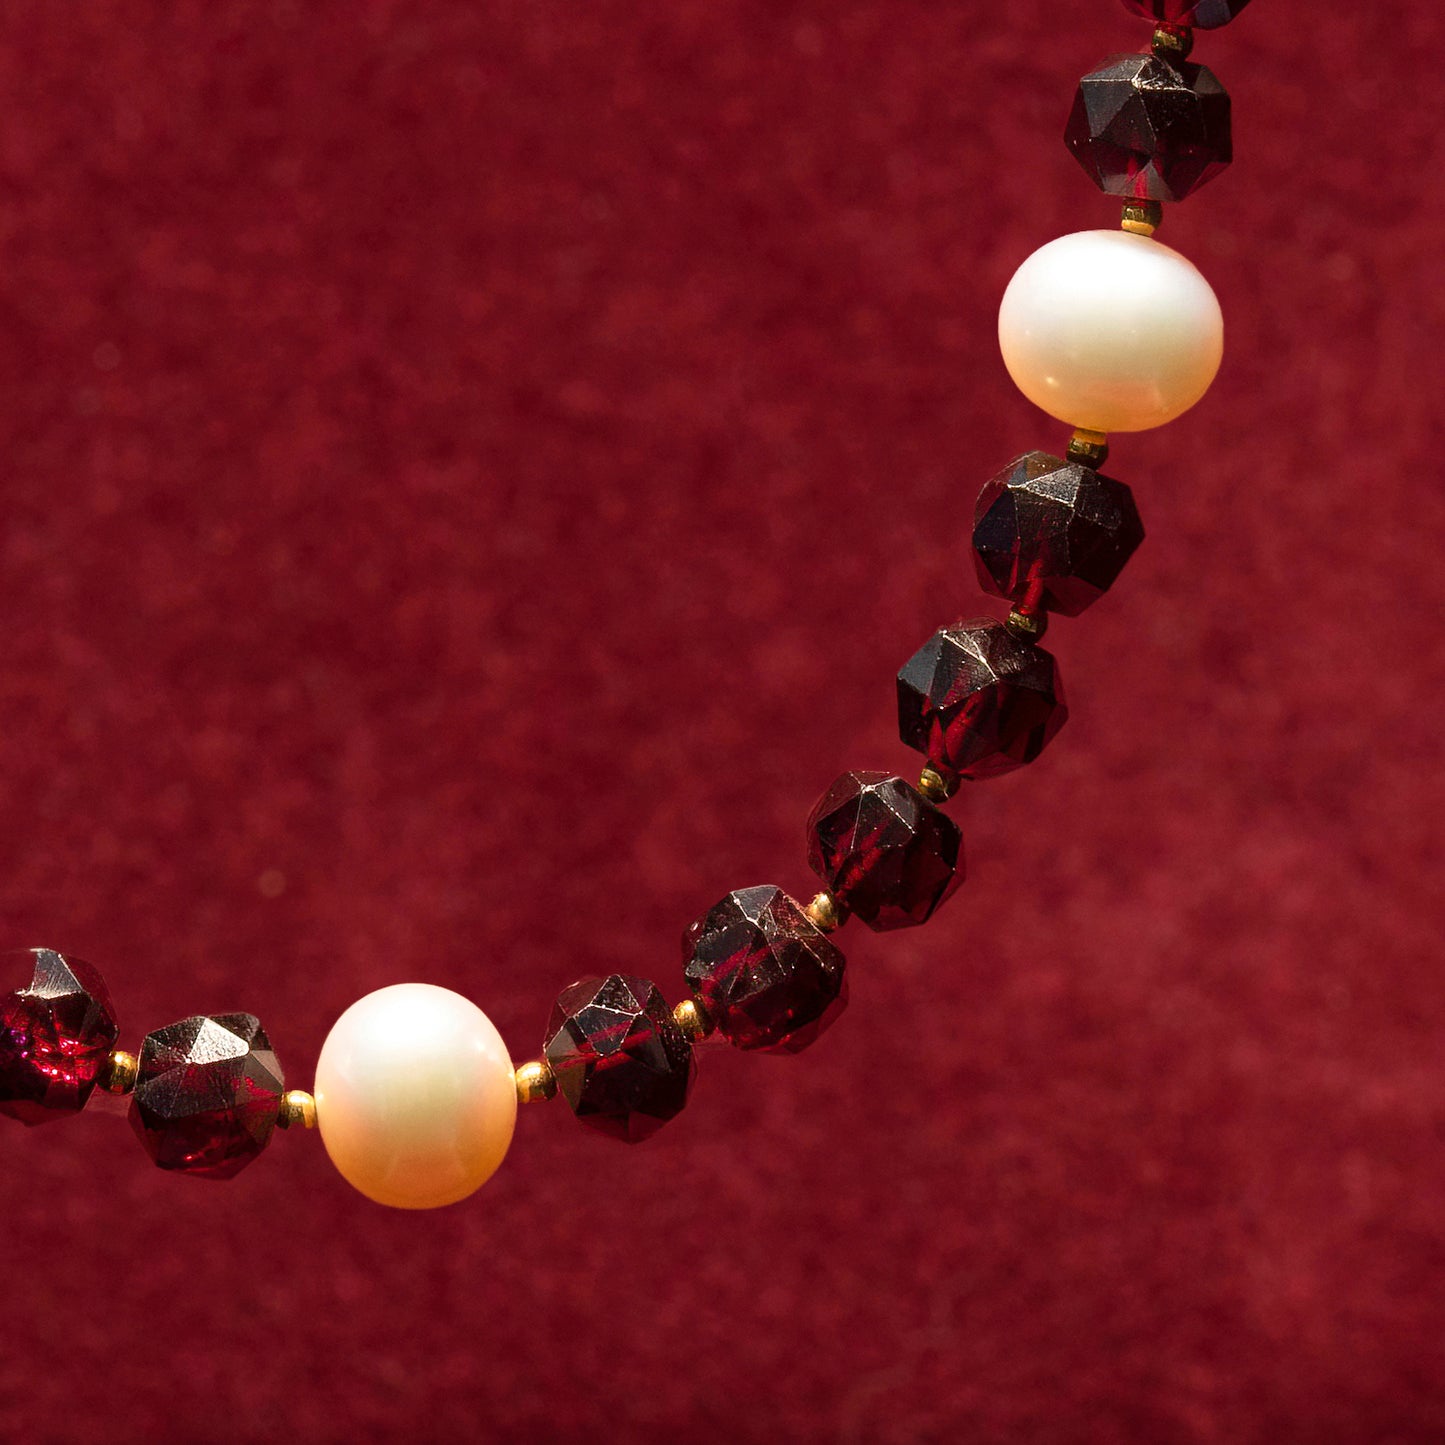 Garnets,pearls and 18K gold necklace